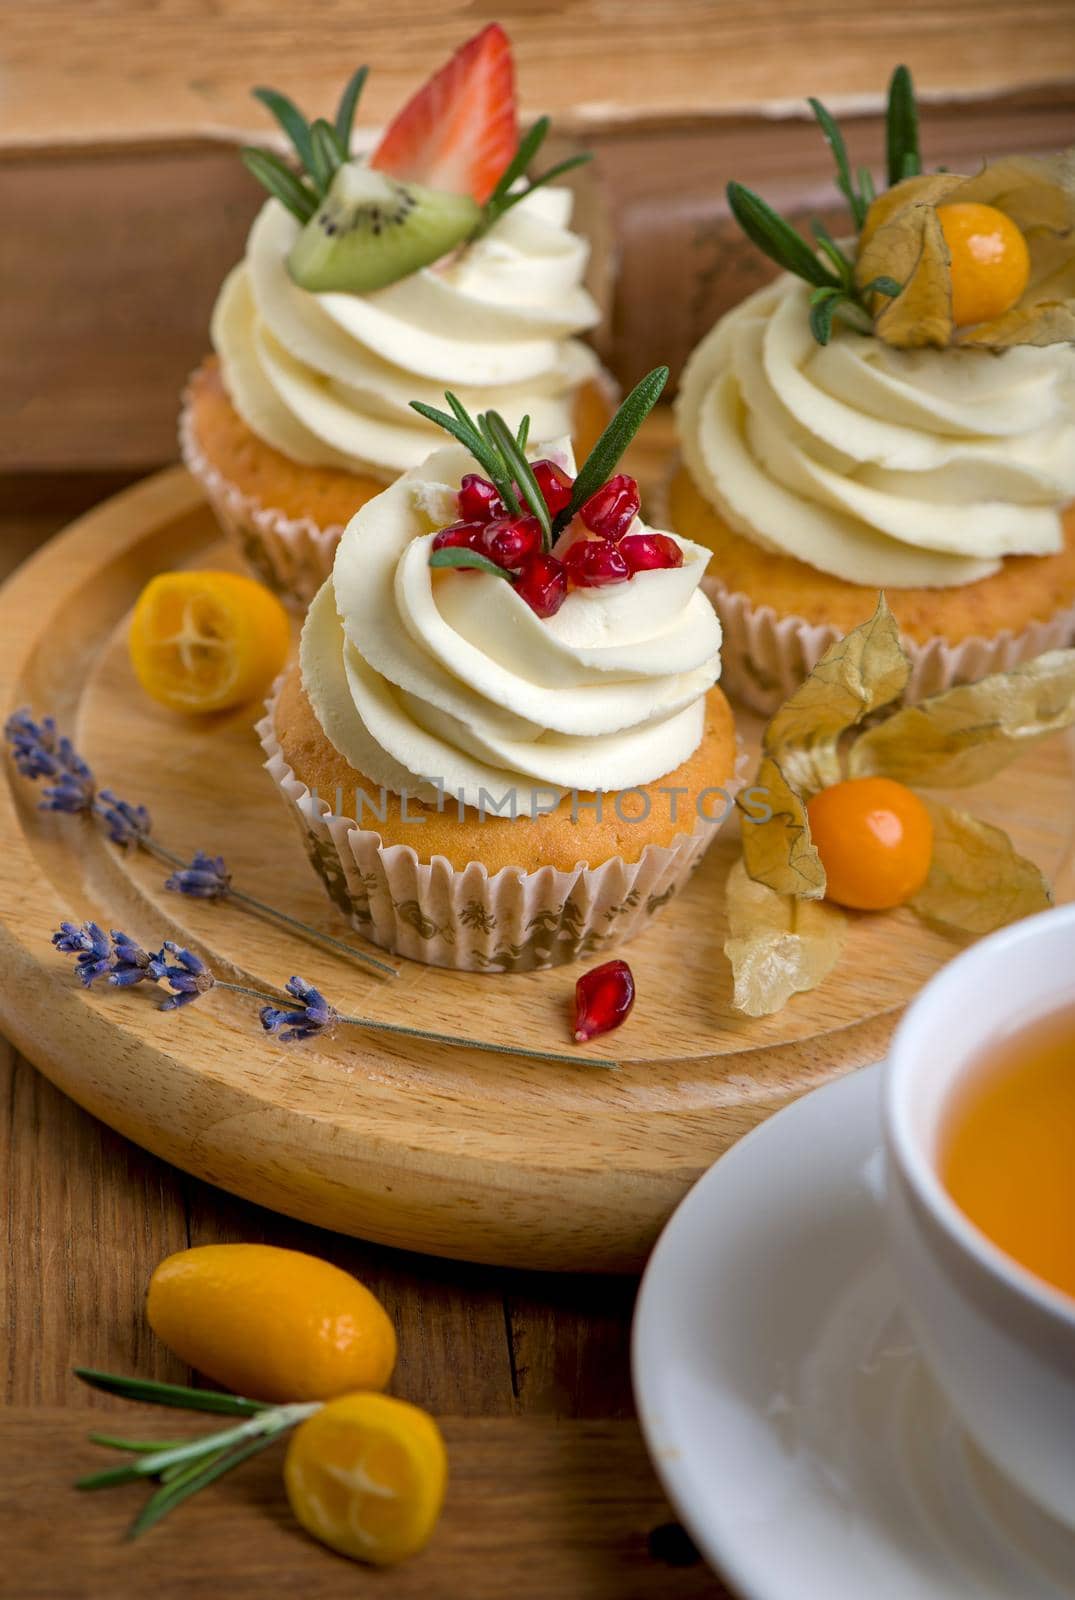 muffins with traditional fall spices. With tea cup. White marble table, copy space